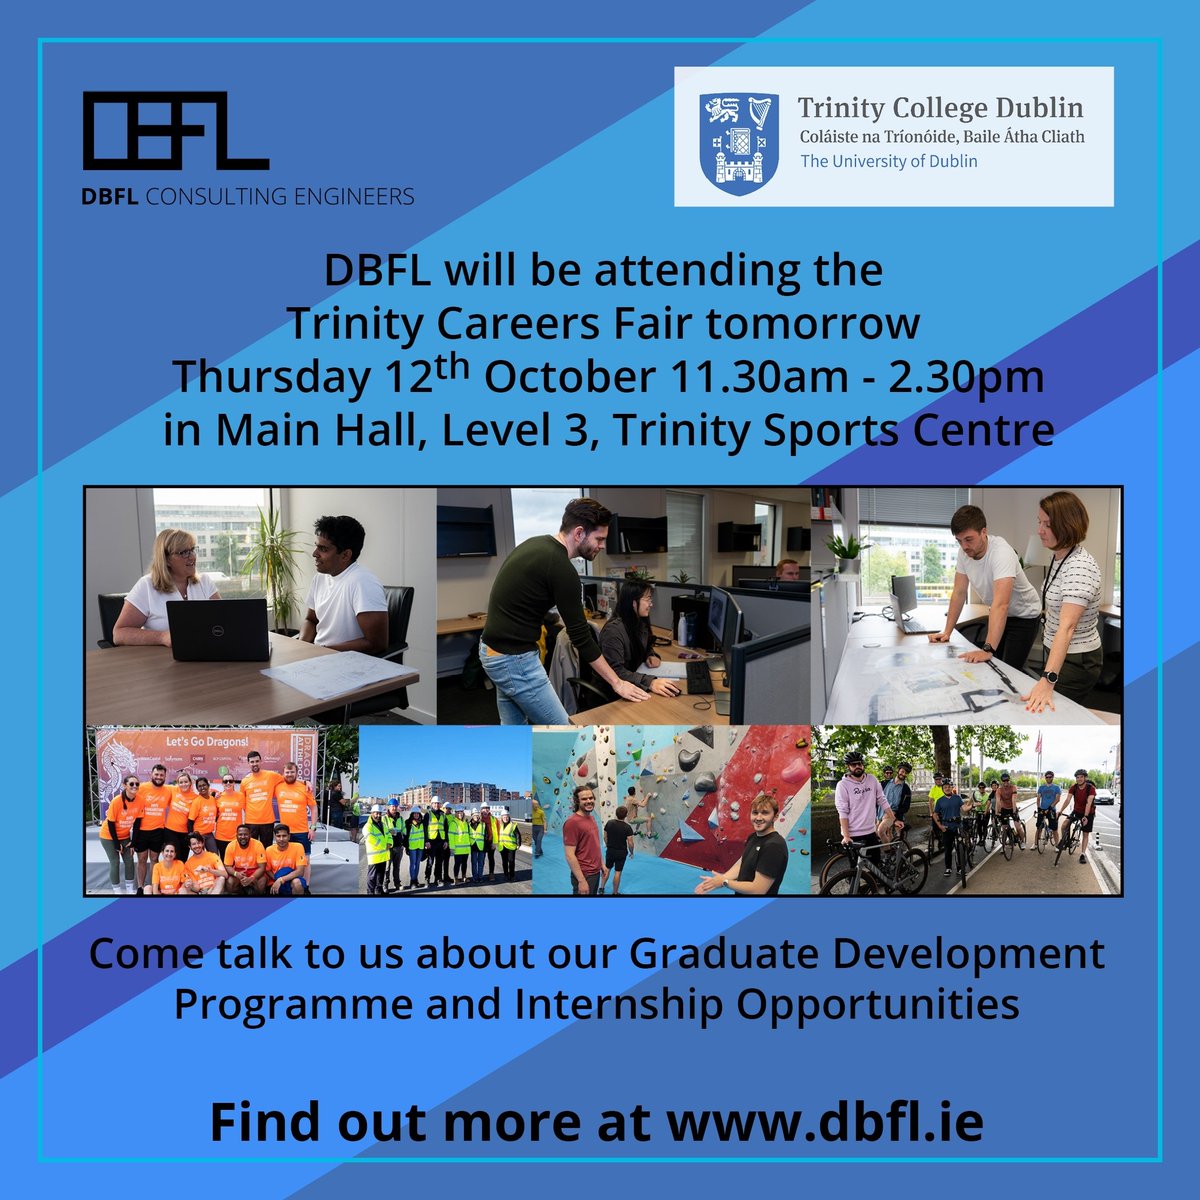 We'll be at the @tcddublin Careers Fair tomorrow Thursday 12th October 11.30am - 2.30pm in Main Hall, Level 3, Trinity Sports Centre. Chat with us about our Graduate Development Programme & Internship Opportunities. dbfl.ie @TCDCareer #TrinityCareersFair